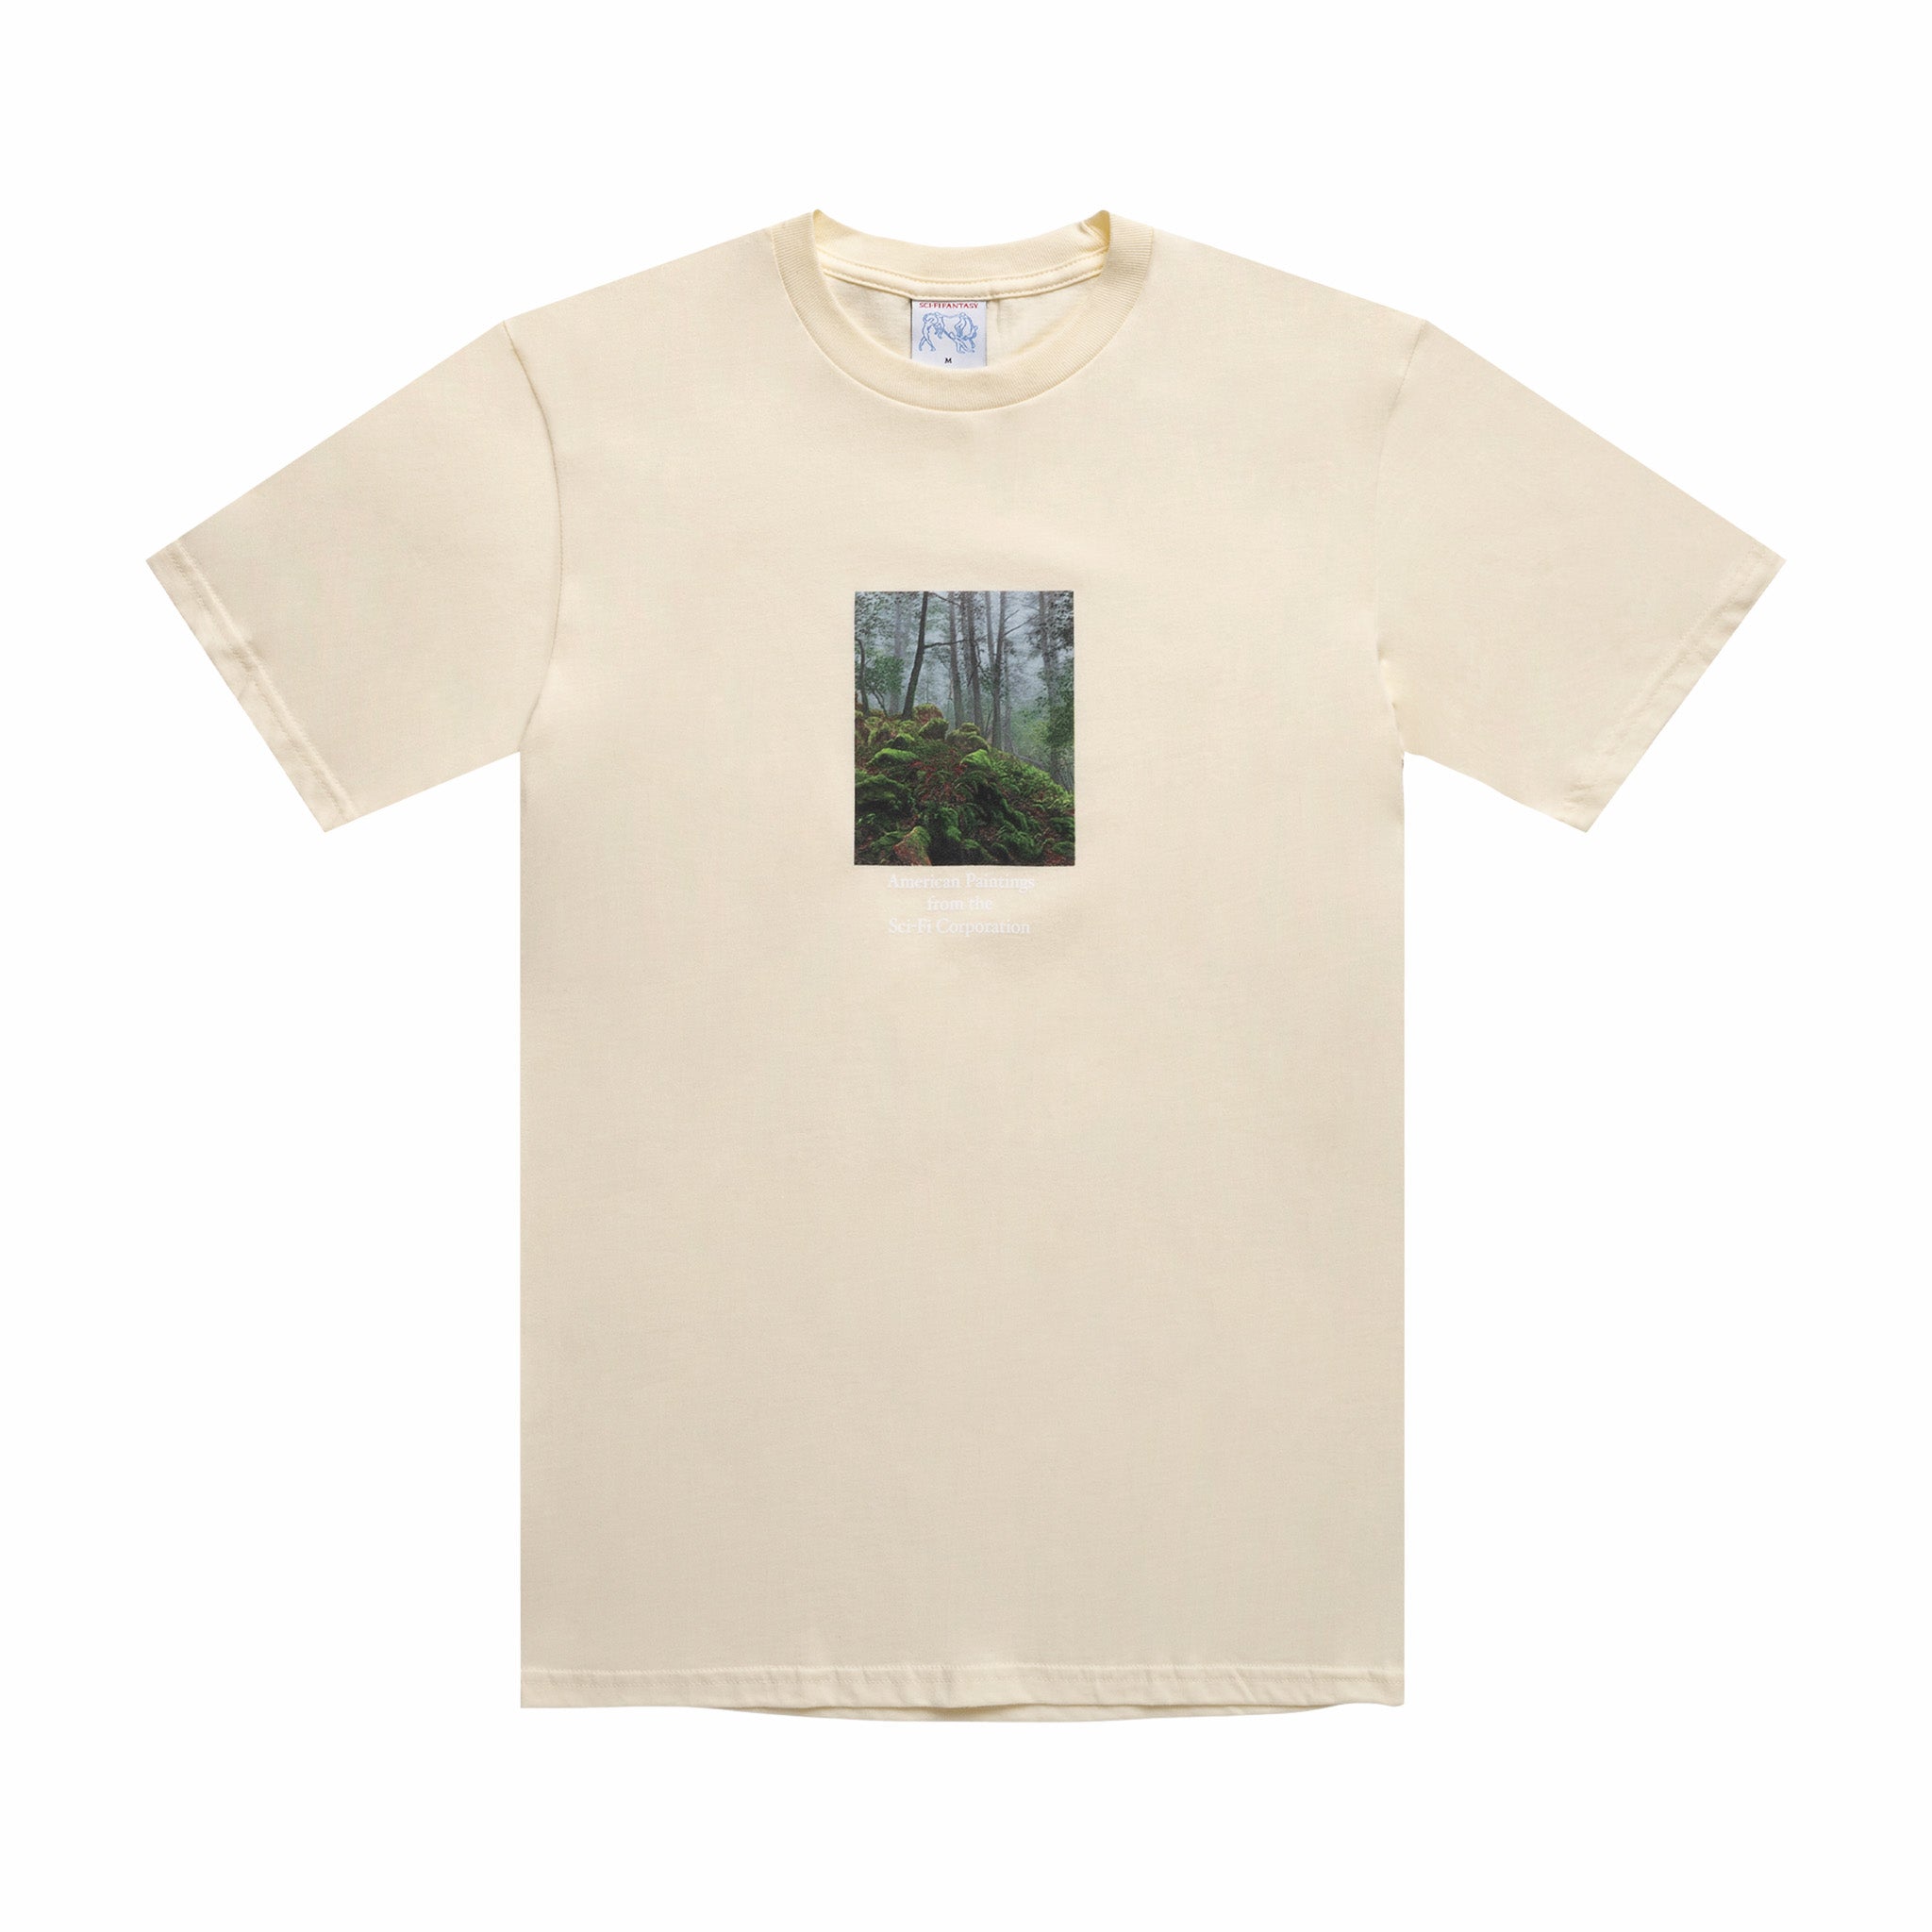 Sci-Fi Fantasy Forest Tee (Natural) - August Shop